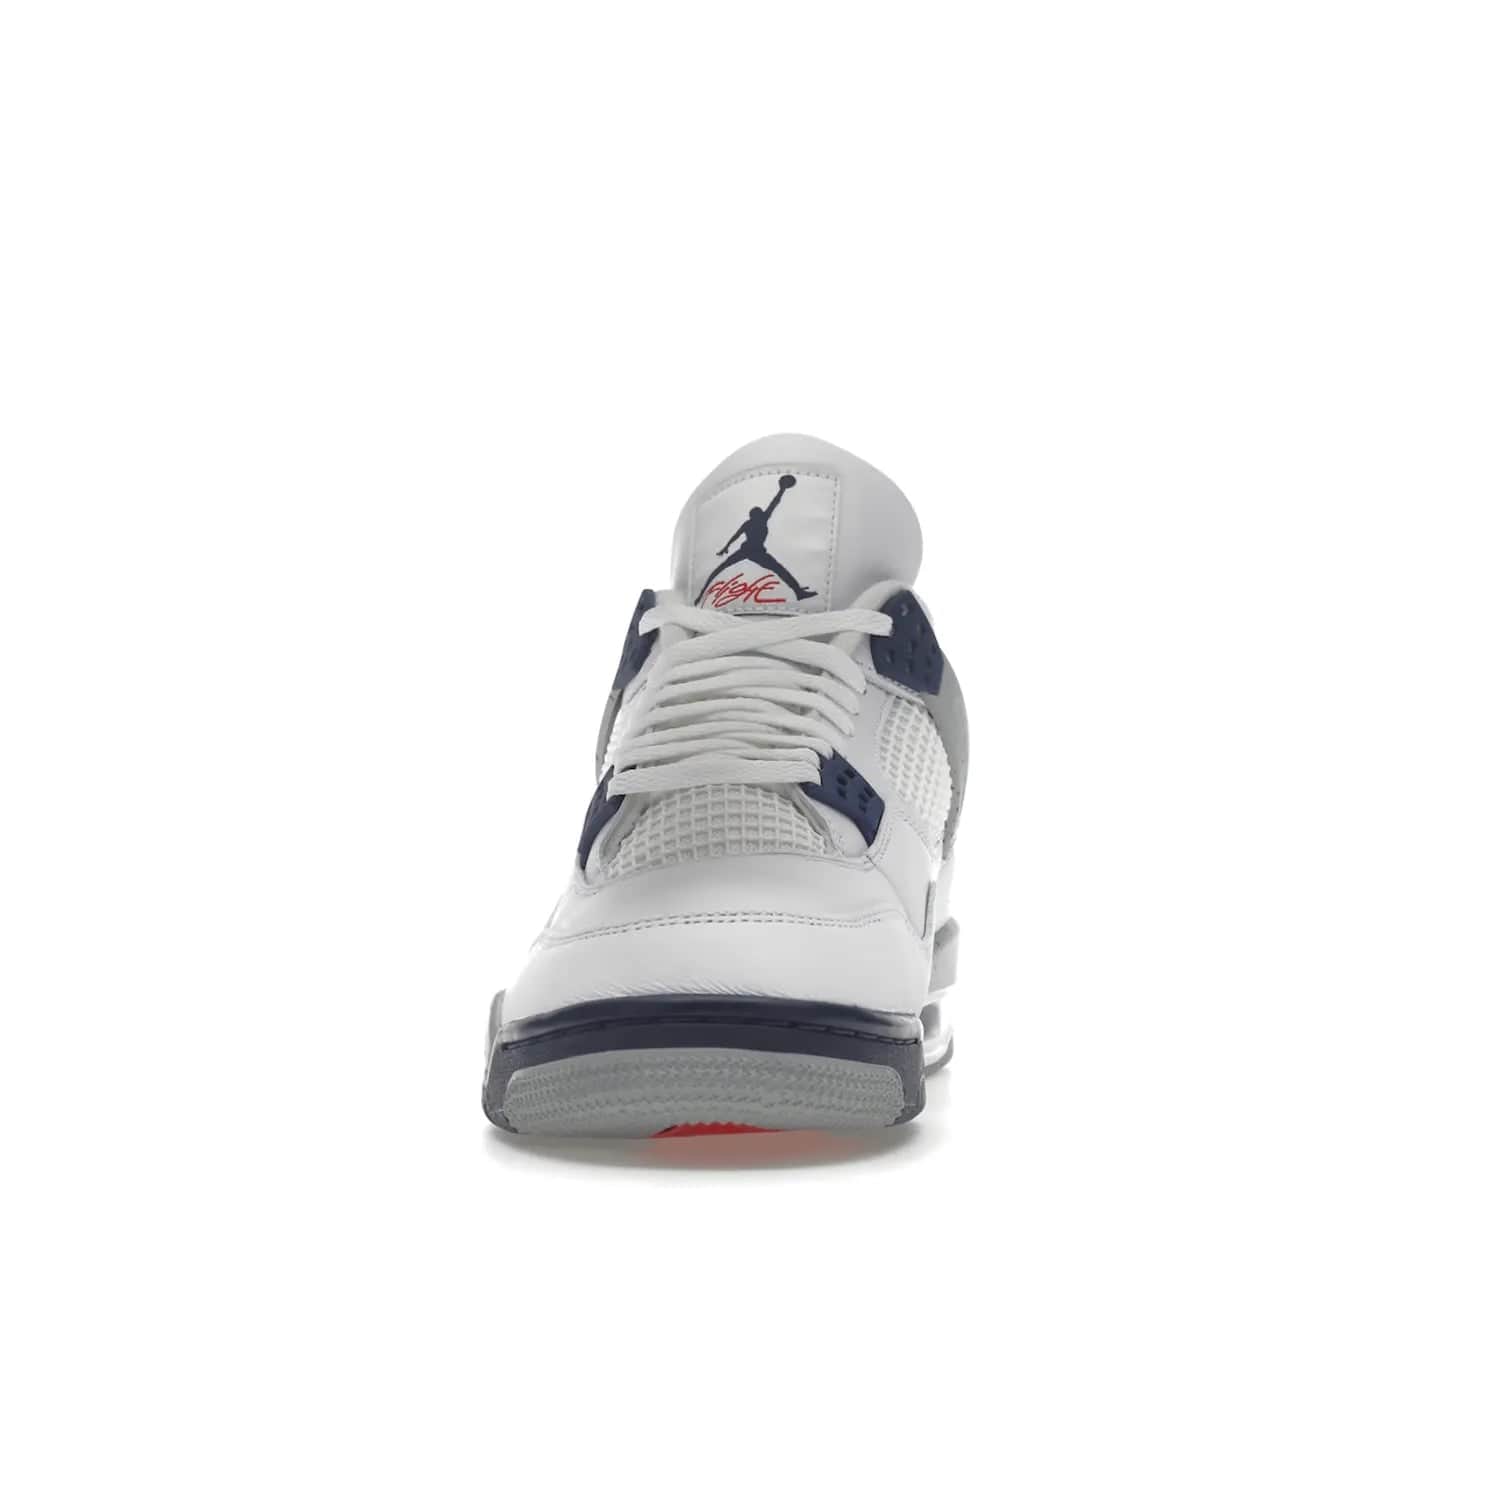 Jordan 4 Retro Midnight Navy - Image 11 - Only at www.BallersClubKickz.com - Shop the Air Jordan Retro 4 White Midnight Navy. Stand out with a classic white leather upper, black support wings, midnight navy eyelets, and Crimson Jumpman tongue tag. Unbeatable comfort with two-tone polyurethane midsole with encapsulated Air technology. Get yours before October 29th, 2022.